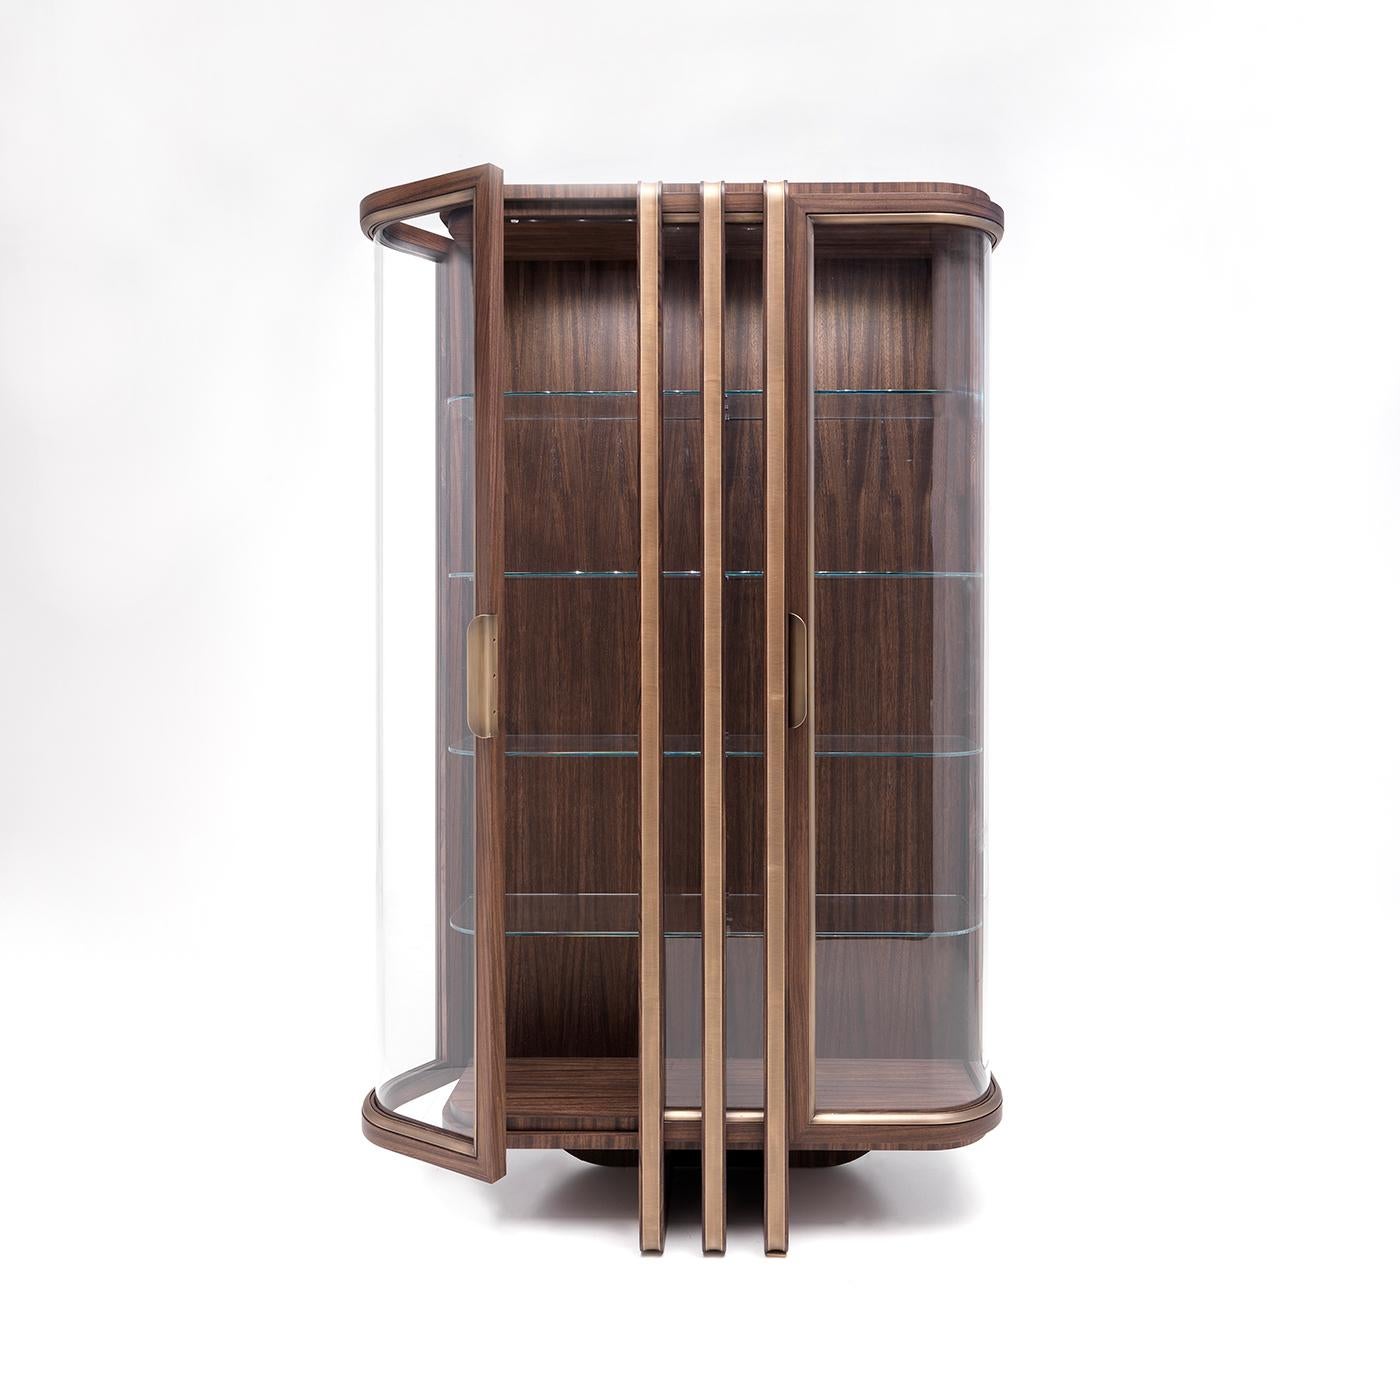 The perfect accent piece for a classic or modern decor, this precious display cabinet features an imposing zebra wood frame. The curved profile of the front is traced by the two glass doors extending to the wooden back to set the attention on the